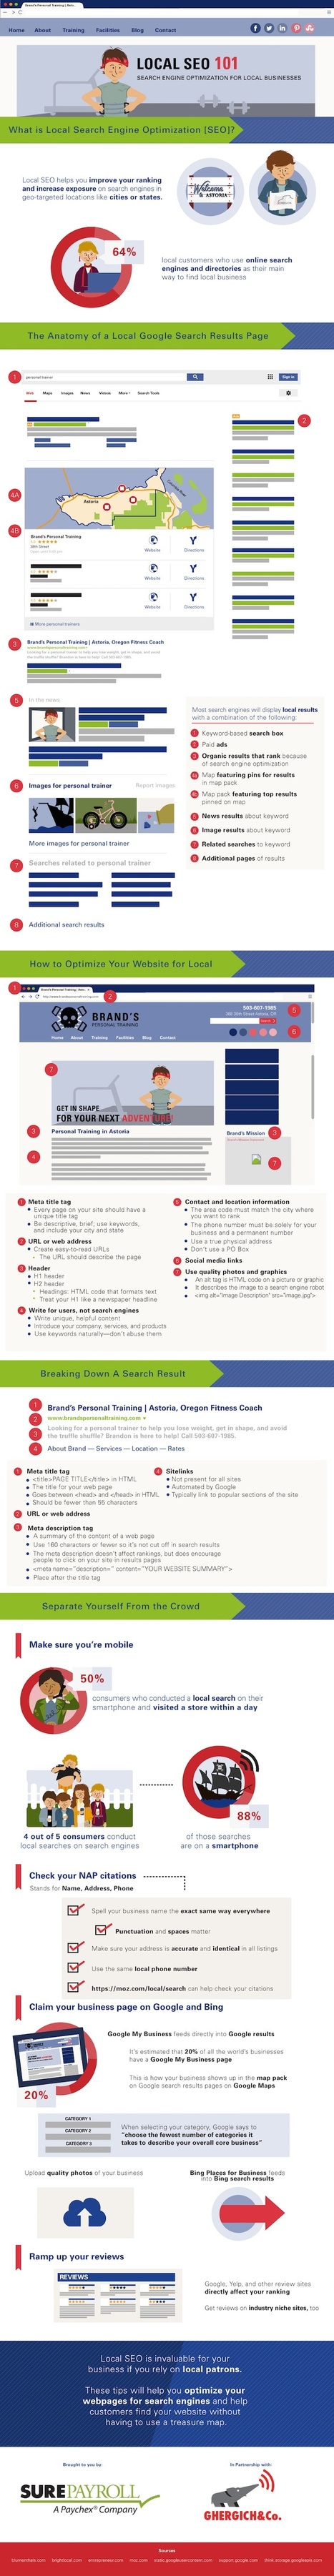 A Simple Guide to SEO for Local Businesses #Infographic | Latest Social Media News | Scoop.it